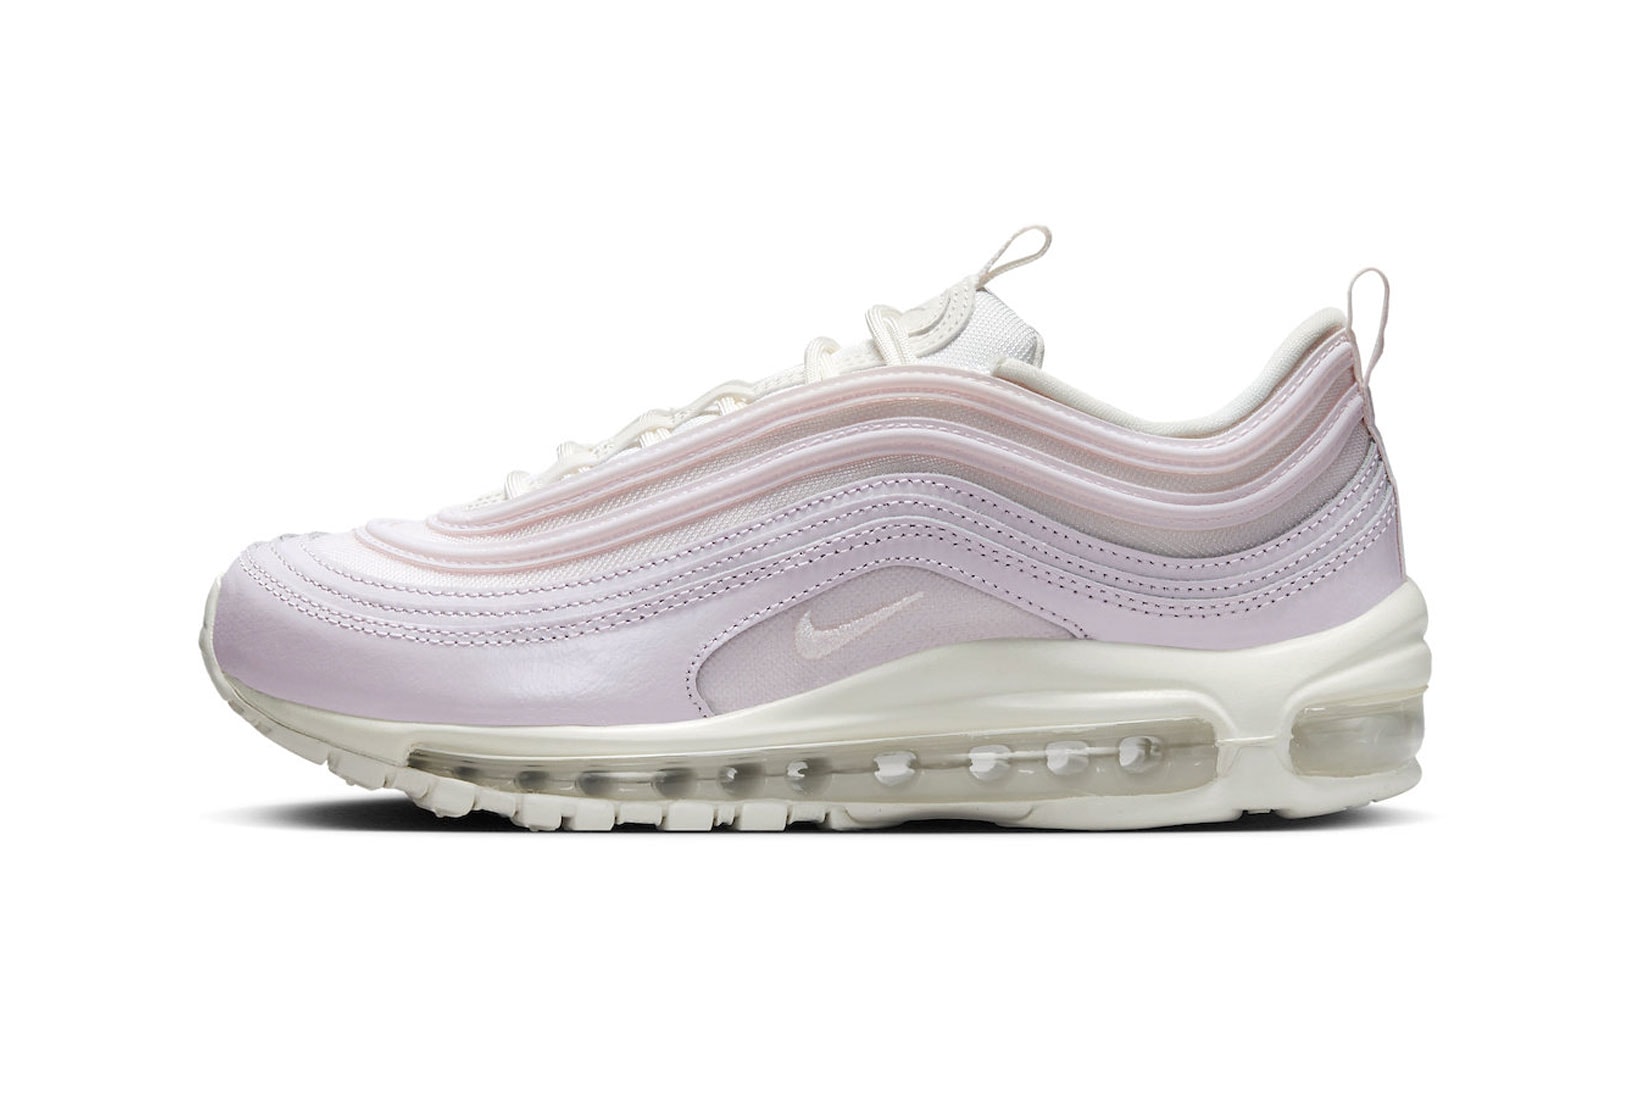 Nike Air Max 97 "Pink" Women's Exclusive Sneaker Release Where to buy